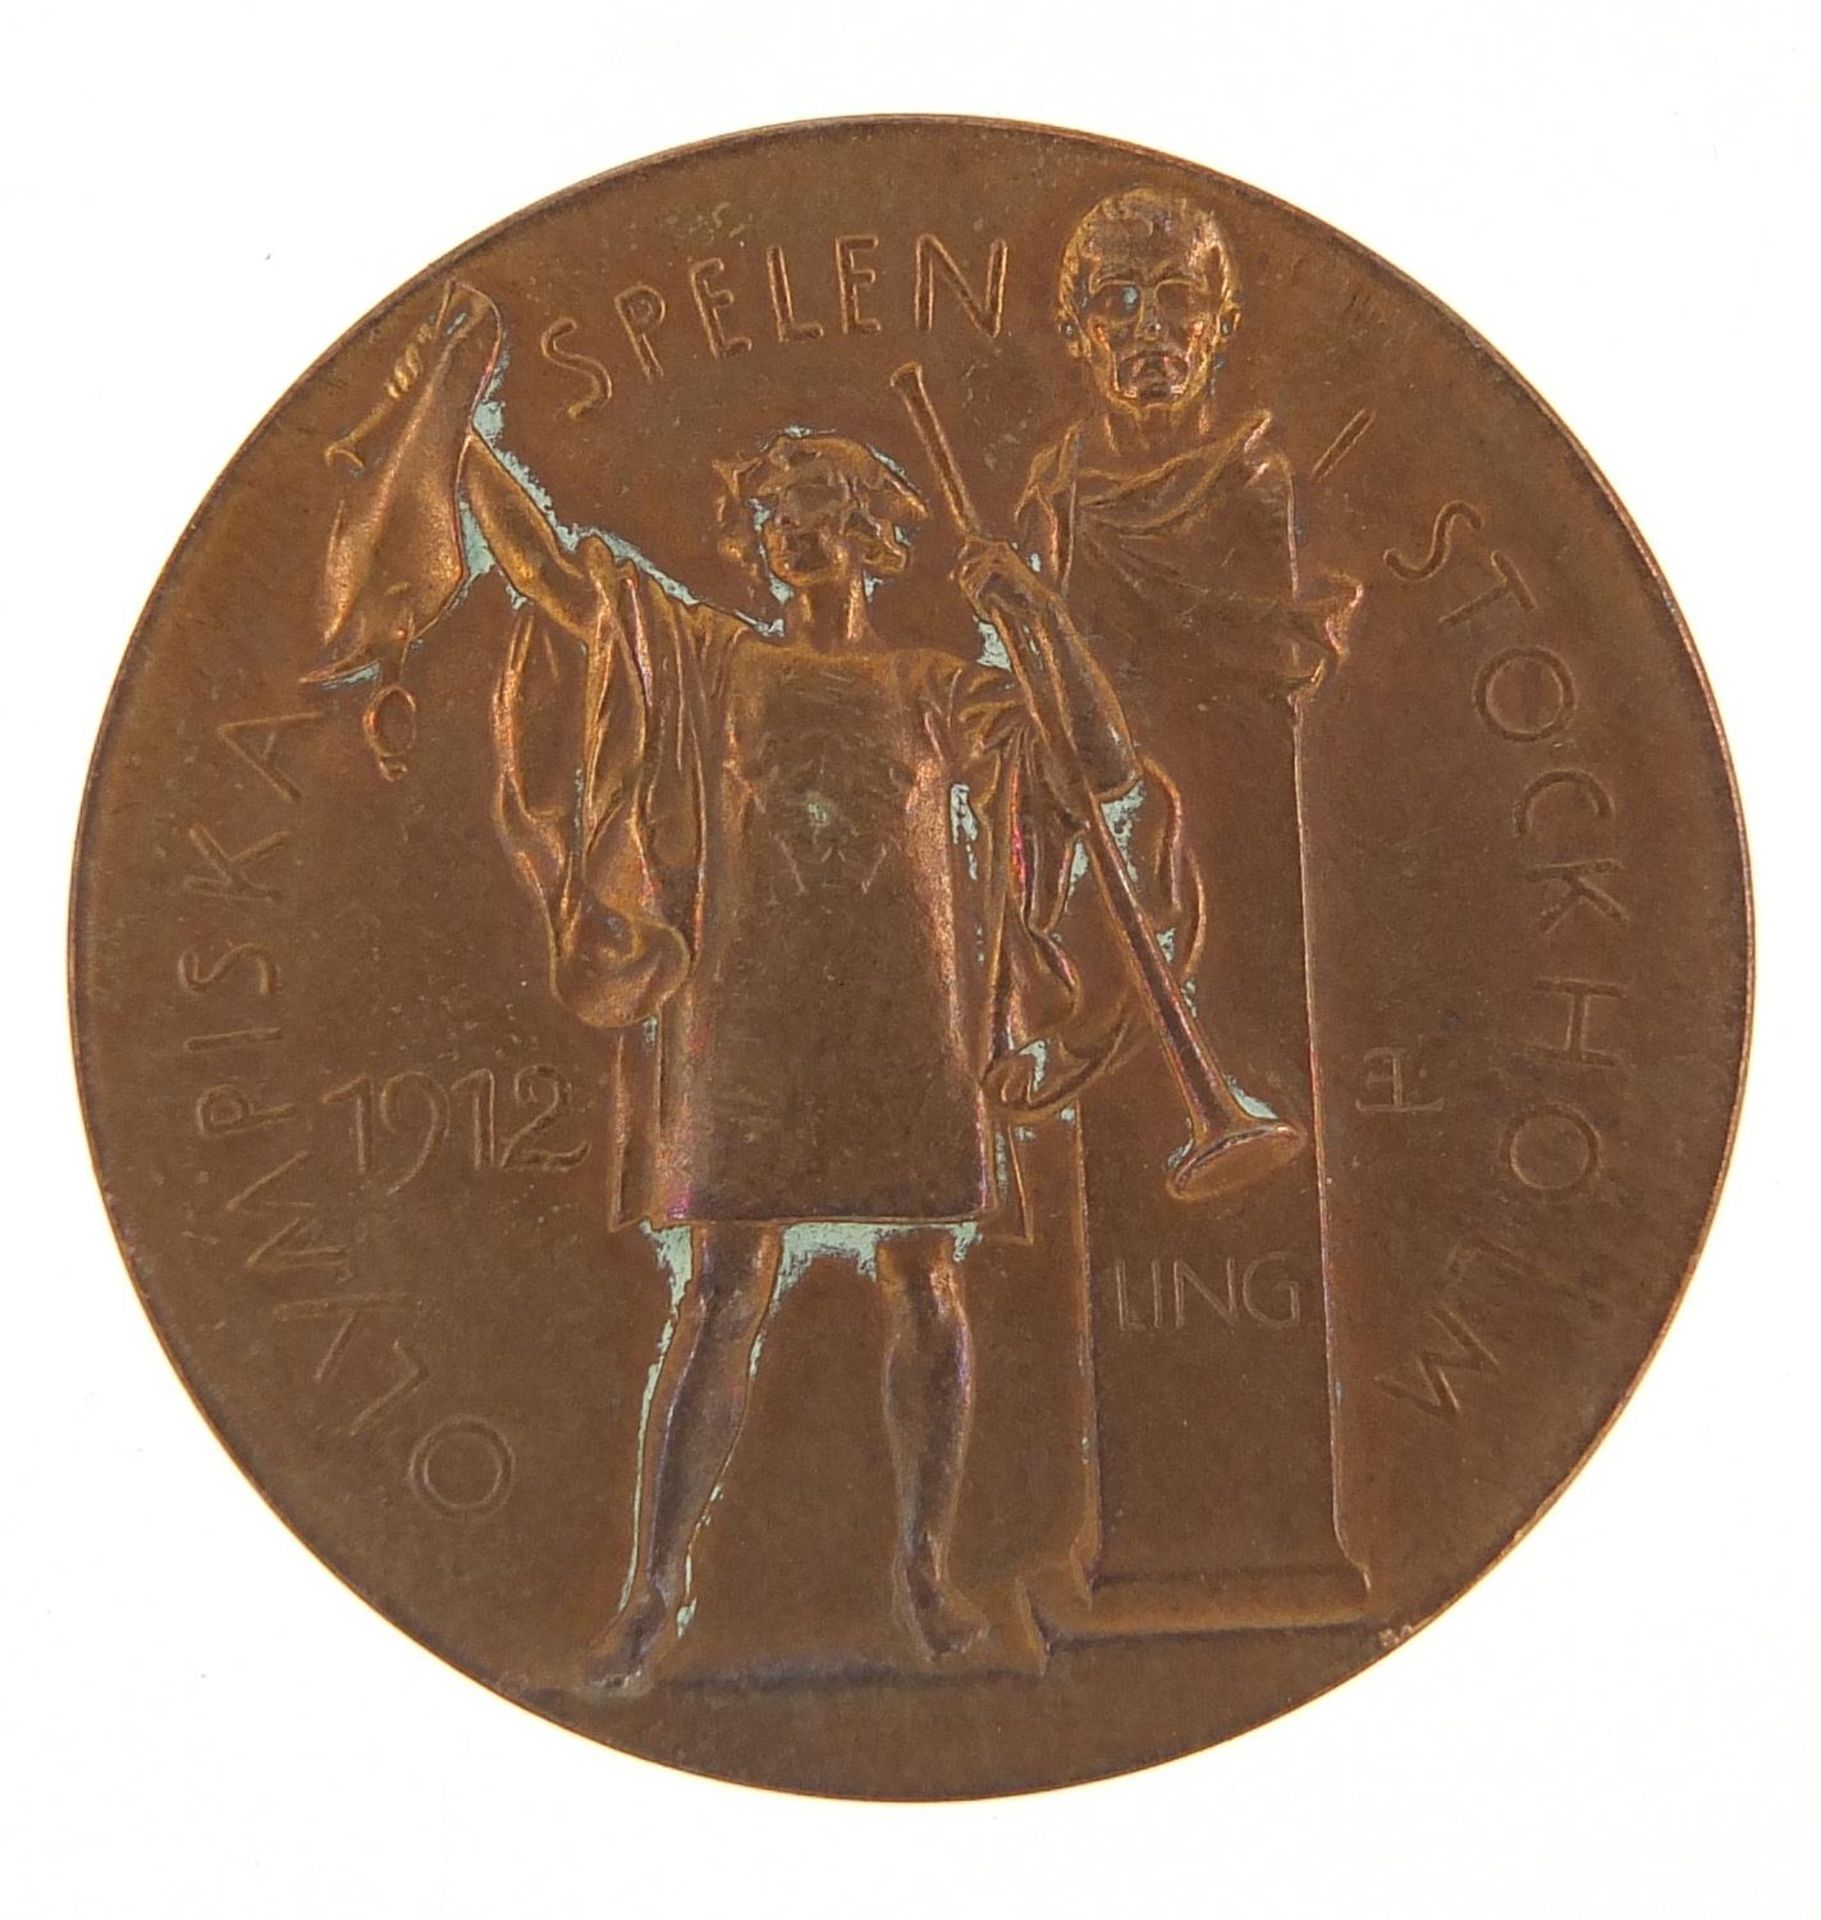 Stockholm 1912 Olympic Games bronze medal, previously owned by George Nicol, 400 metre athlete for - Image 2 of 2